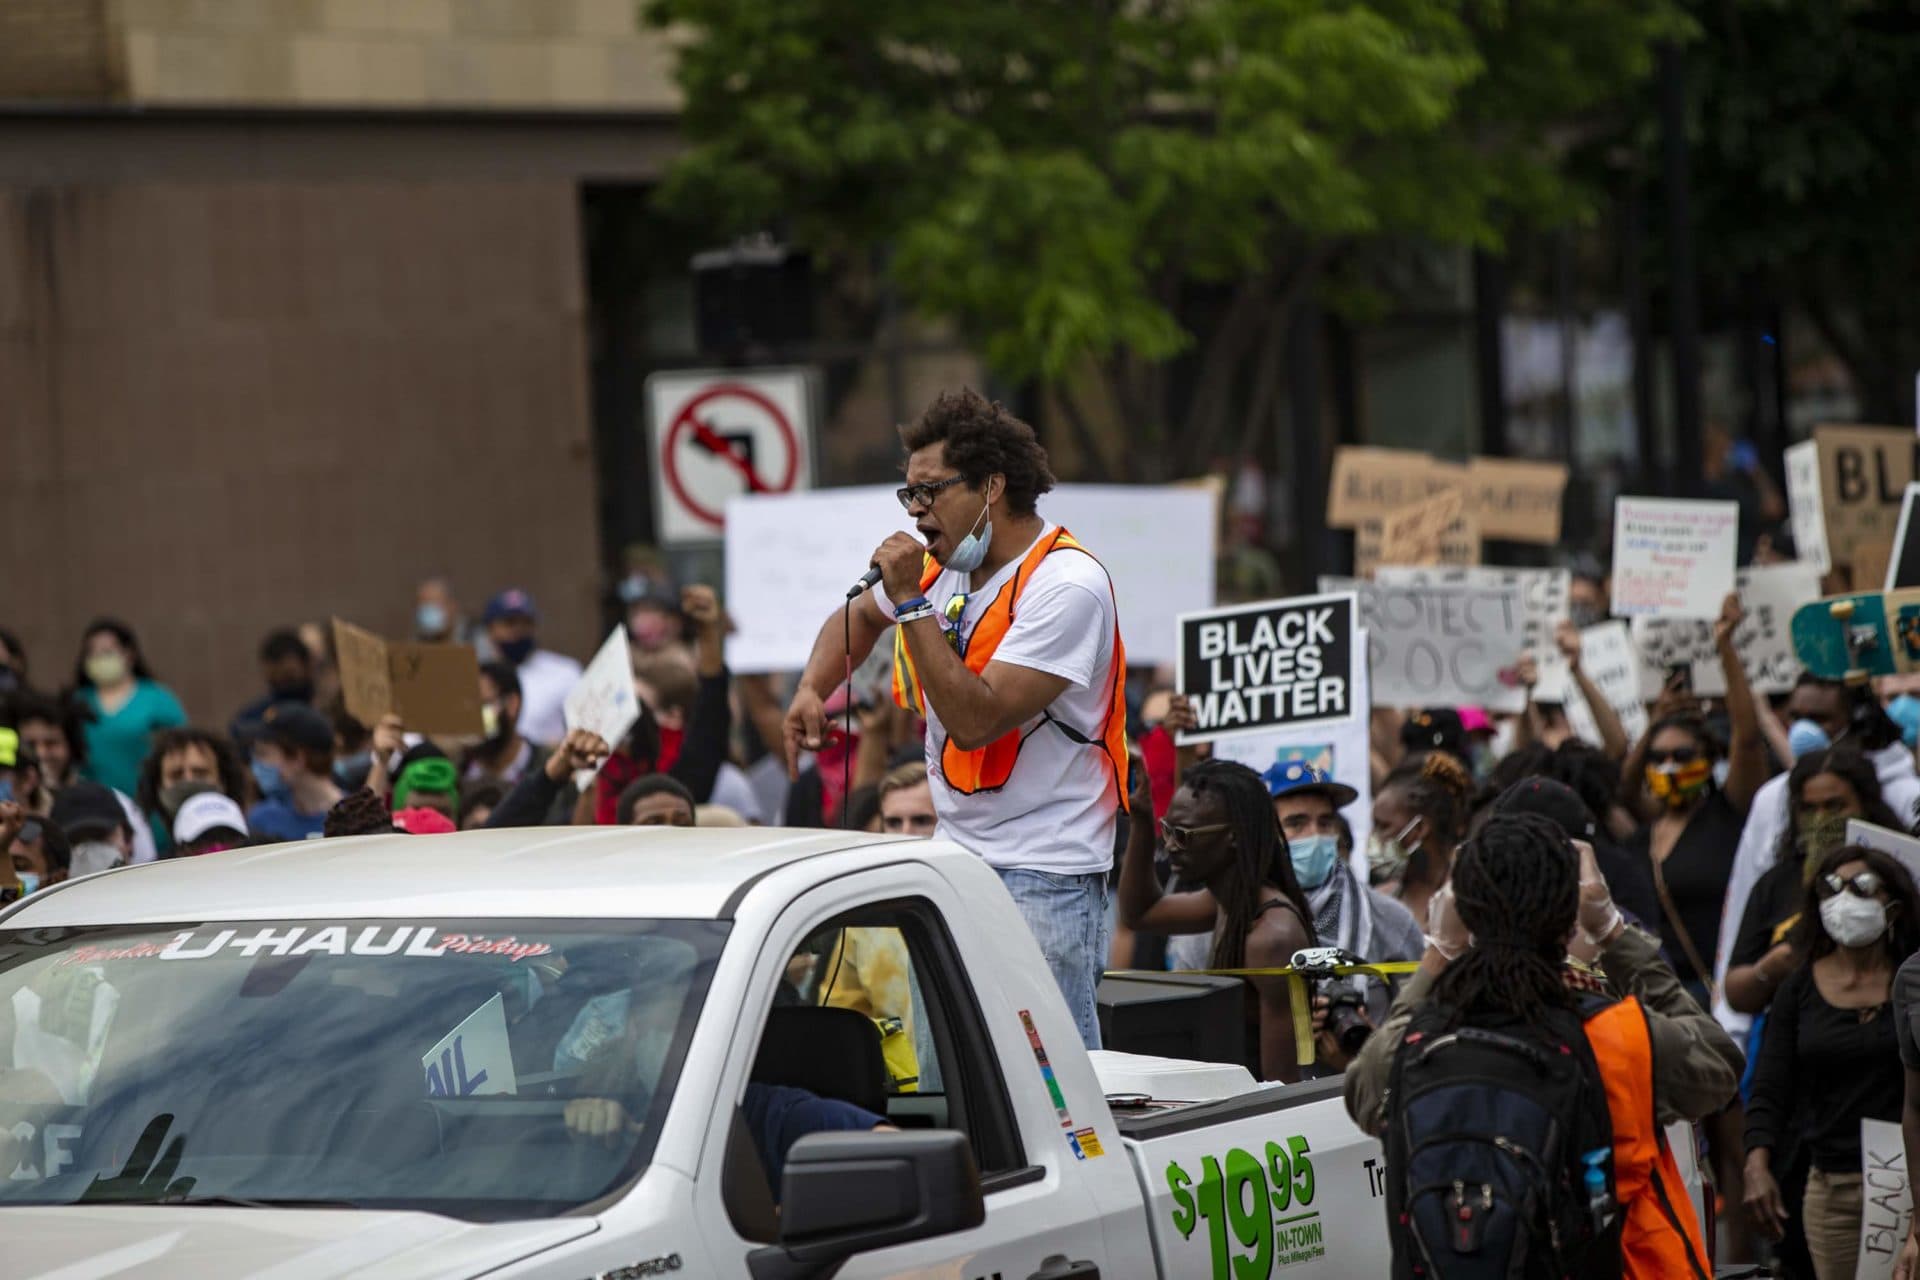 In the back of a rental pickup, Brock Satter leads about one thousand protesters down Washington Street in Boston in outrage over the killing of George Floyd among other protests nationwide. (Jesse Costa/WBUR)